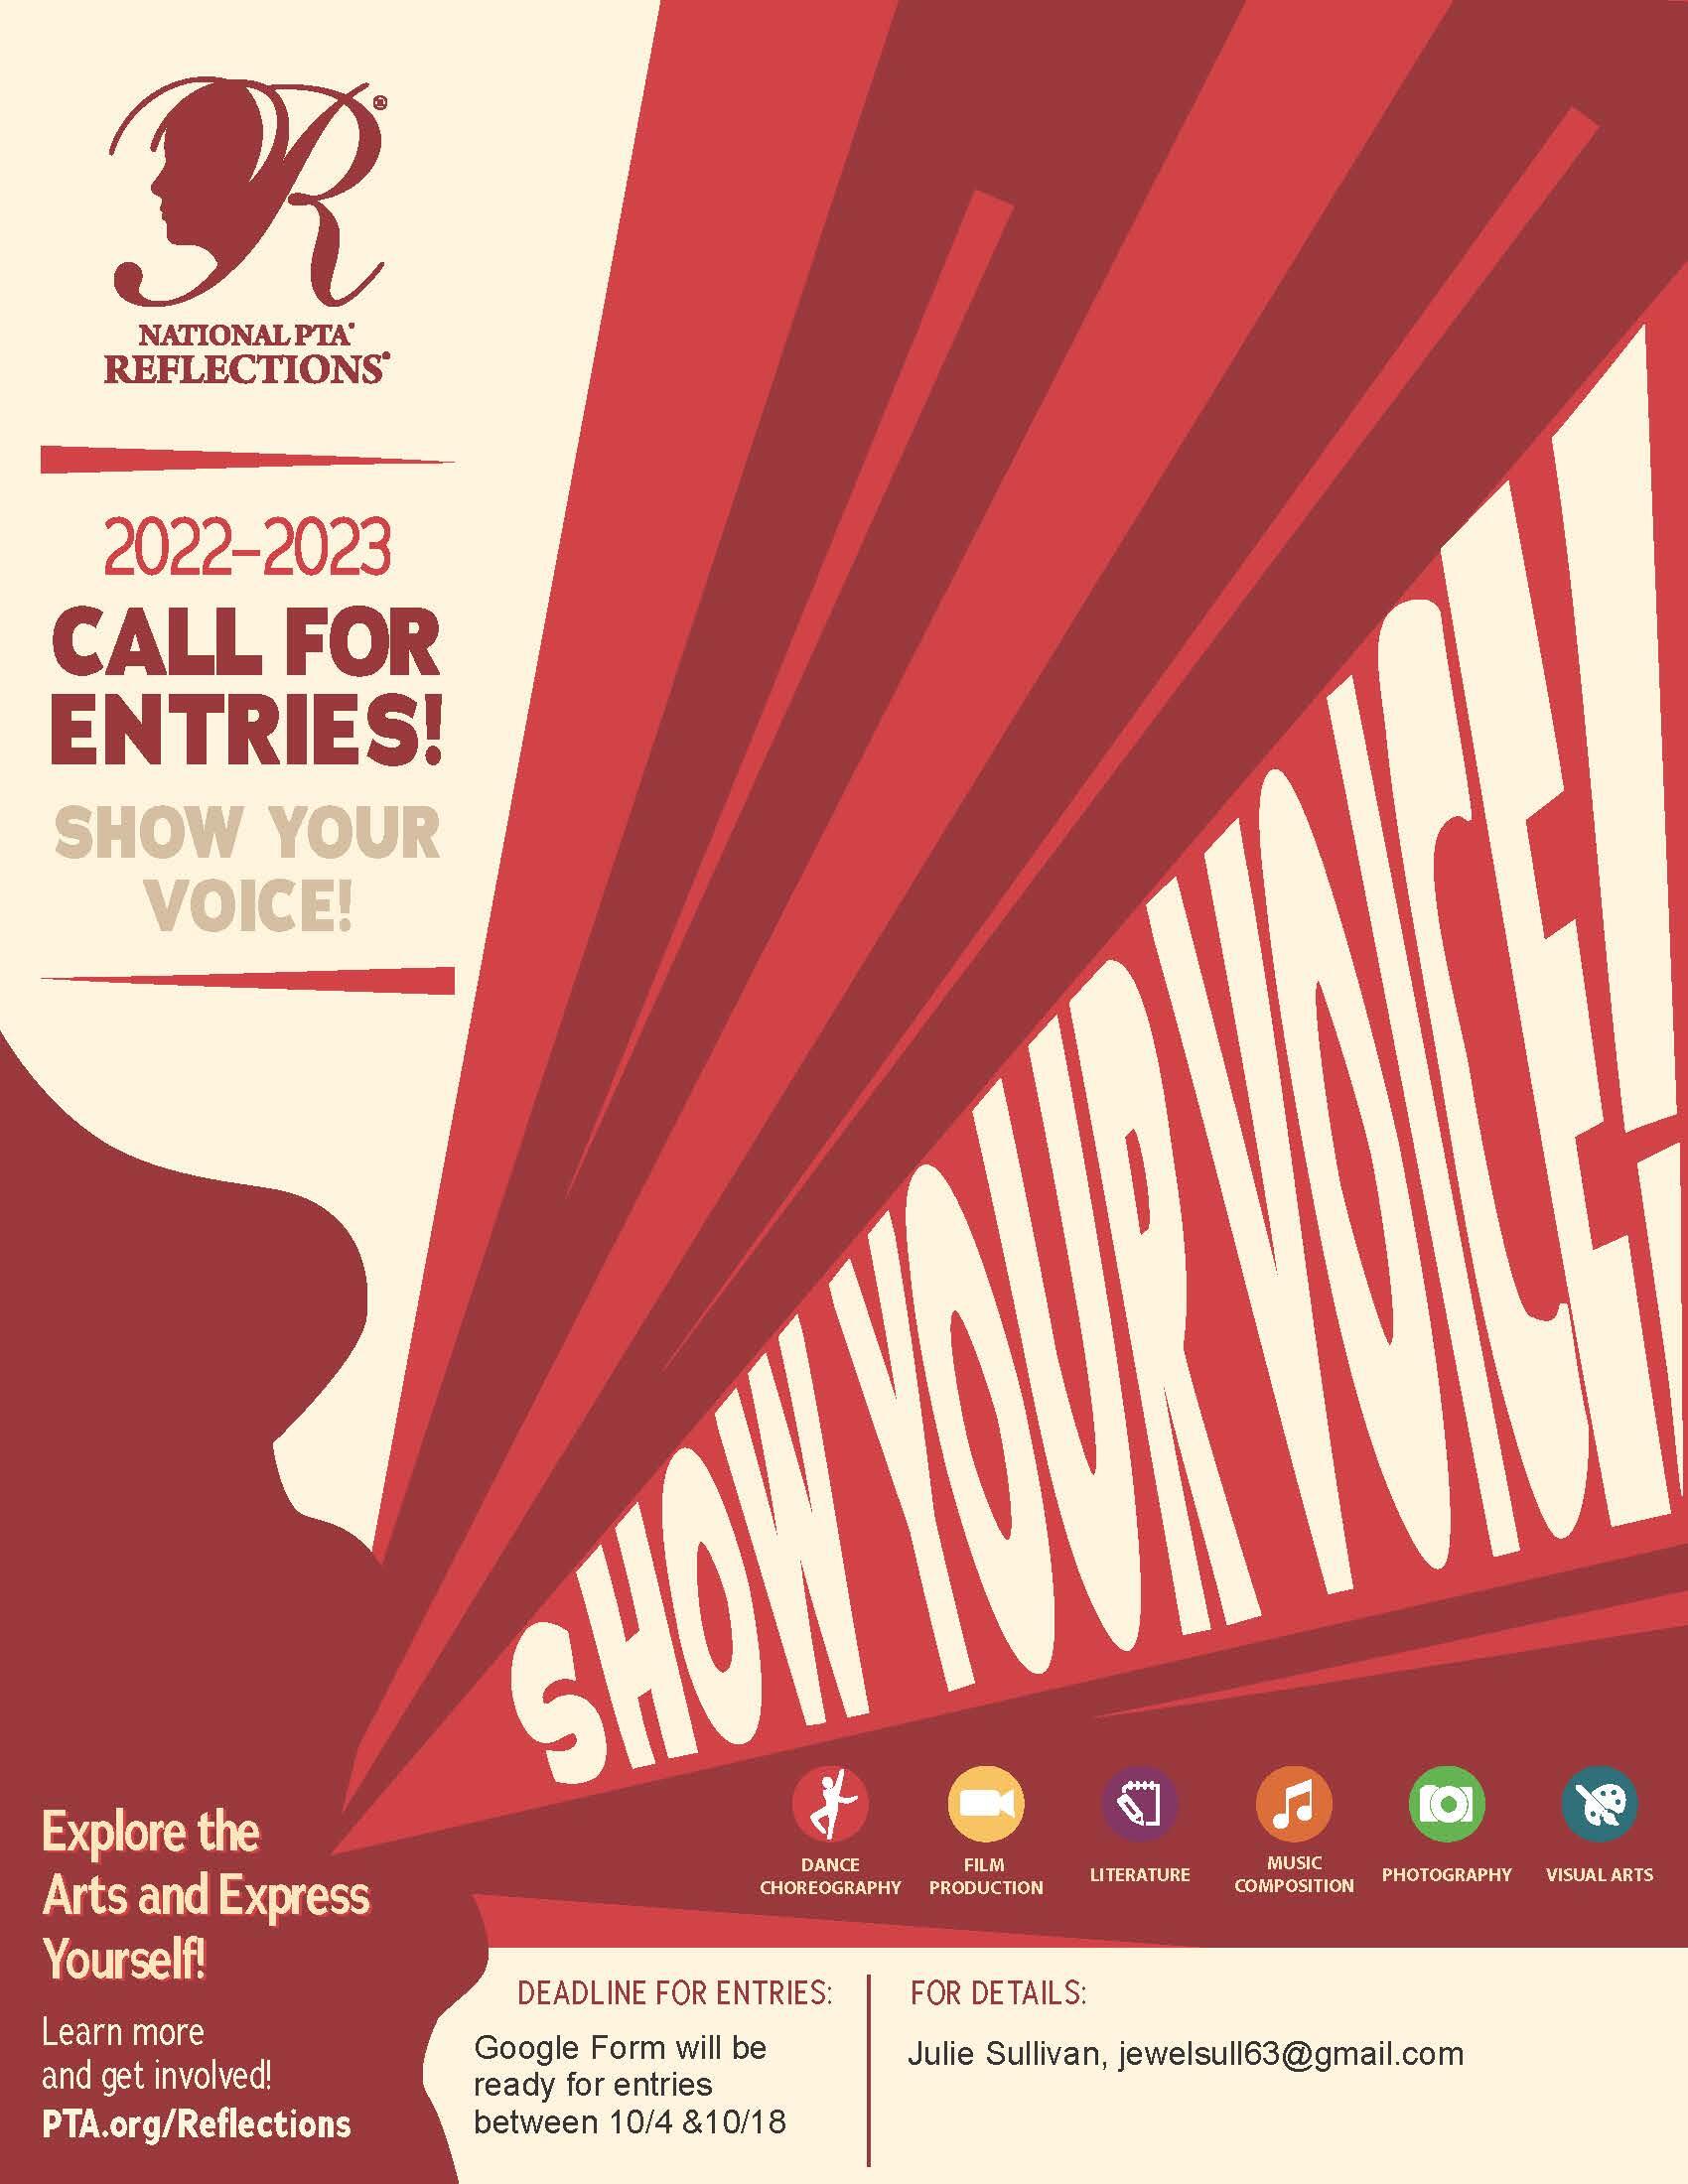 Call for Entries - Show your Voice!